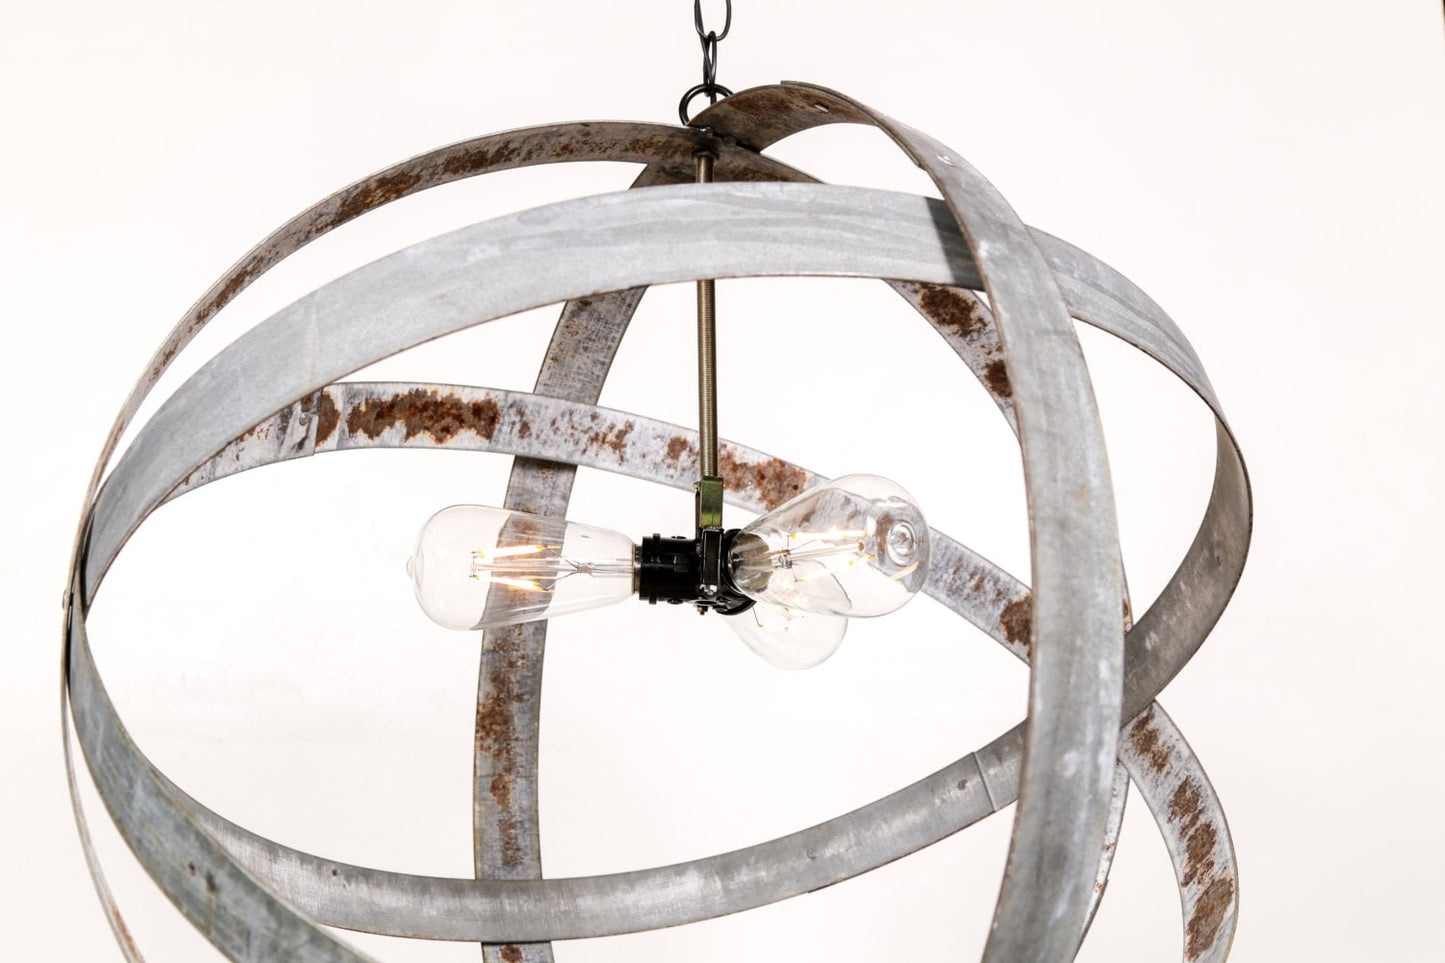 Wine Barrel Ring Chandelier - Premier - Made from retired California wine barrel rings. 100% Recycled!